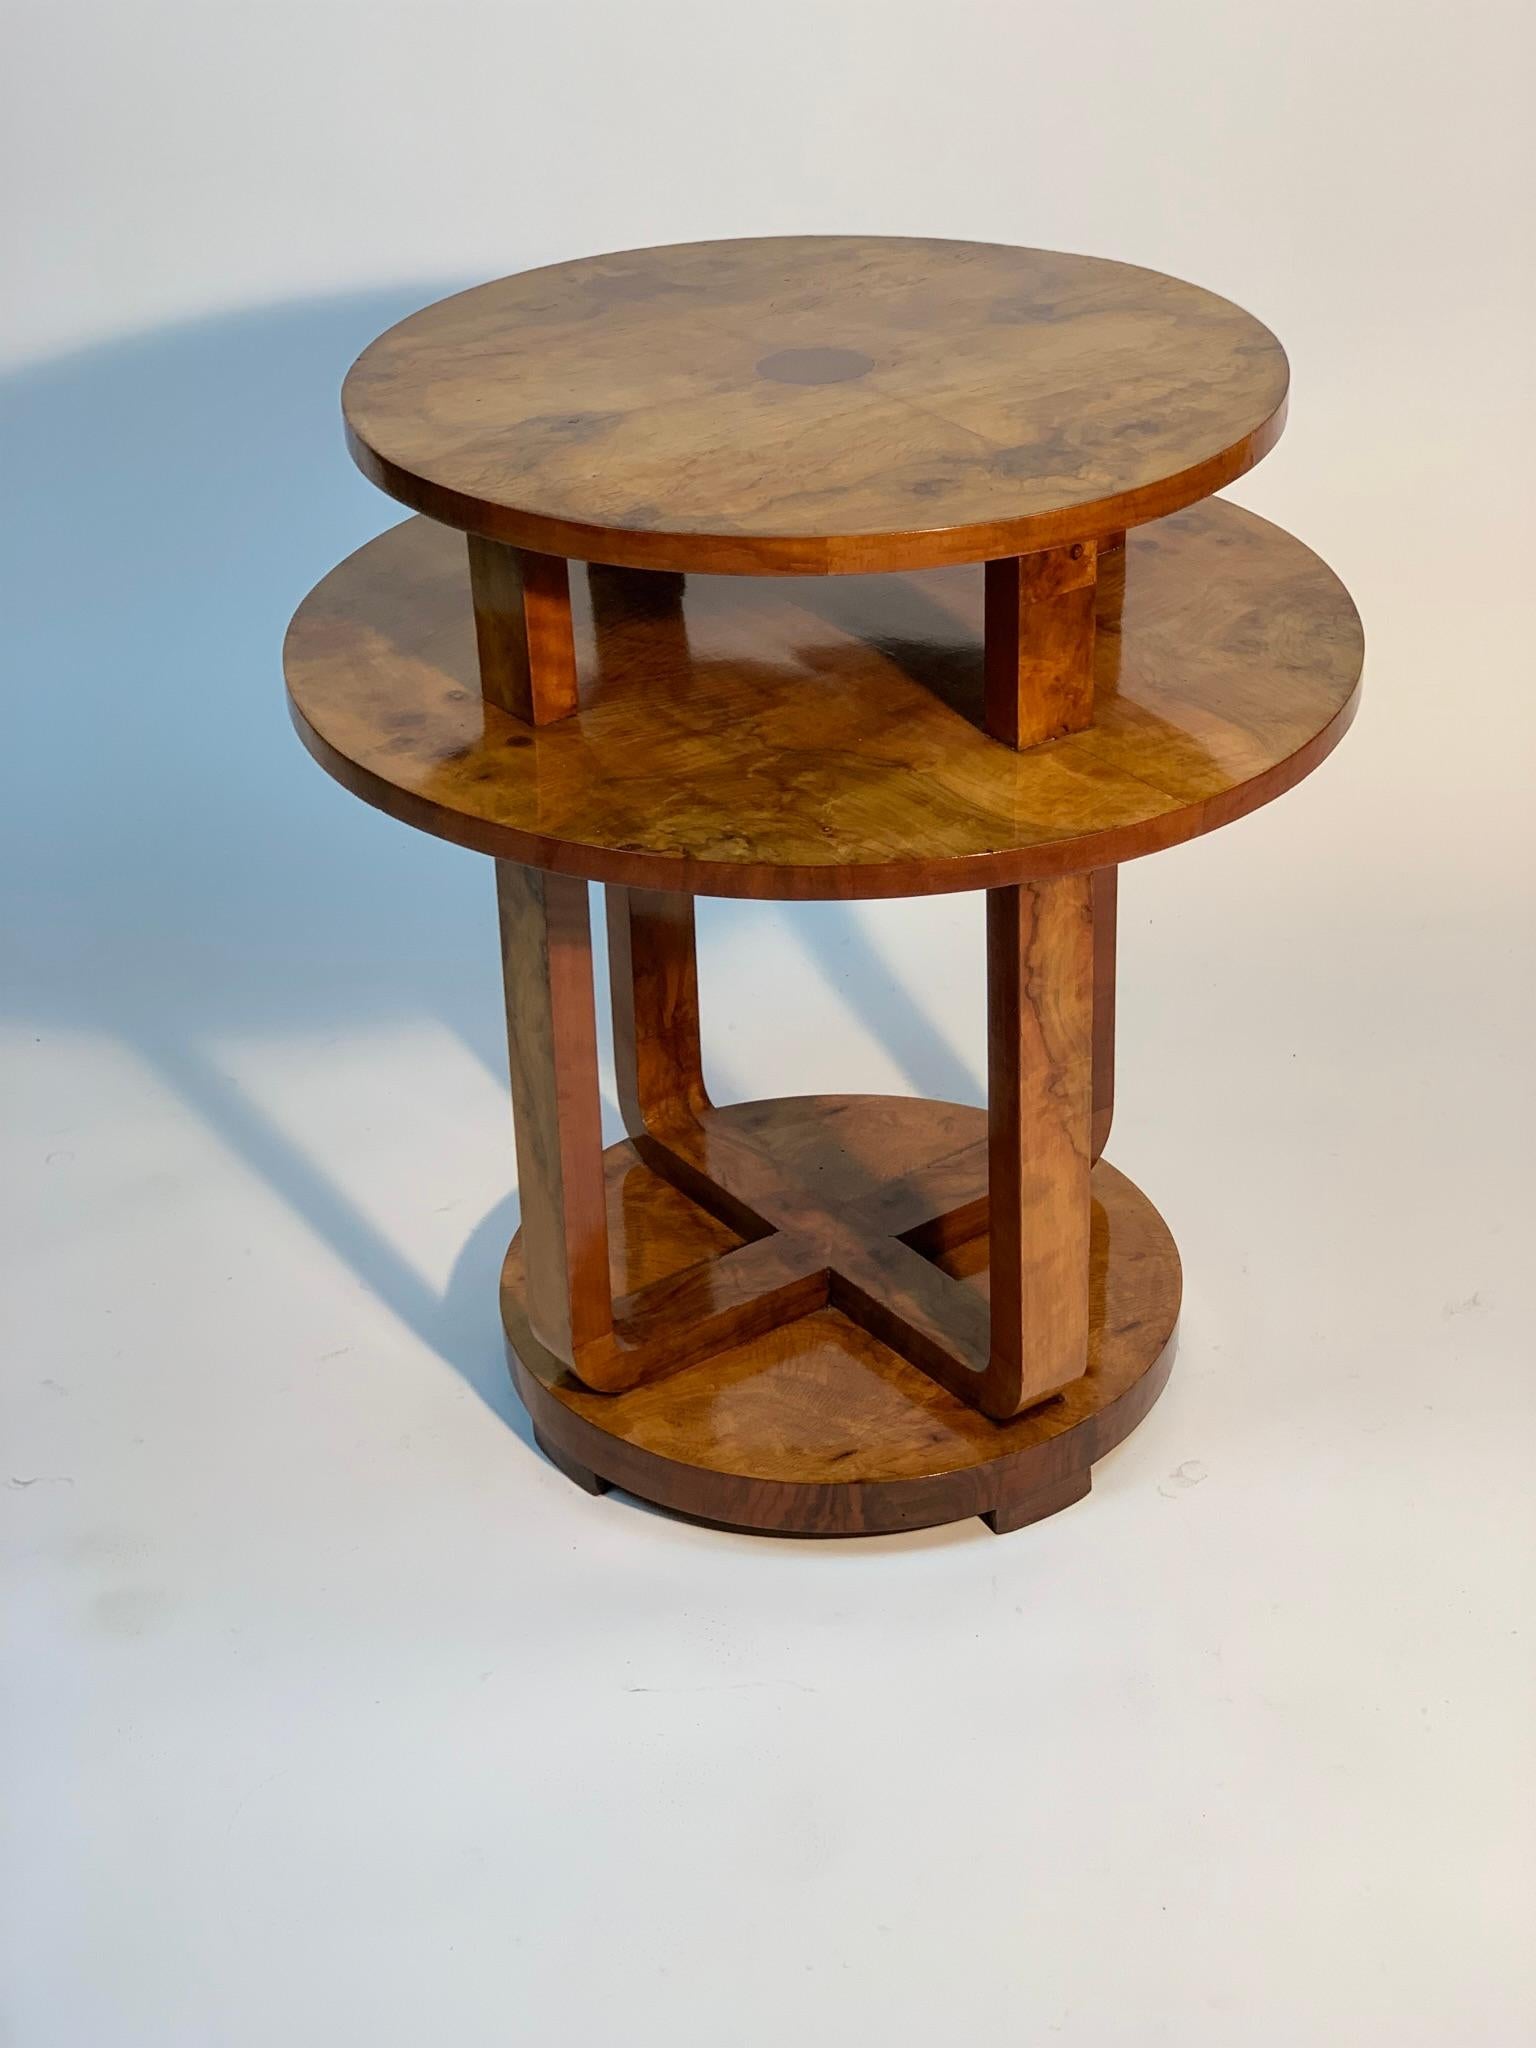 Round coffee table with double top, the upper smaller the lower the larger one, this allows you to easily place books and objects on the lower surface without hitting the upper one, the supports are basket-like consisting of four legs, two U-shaped